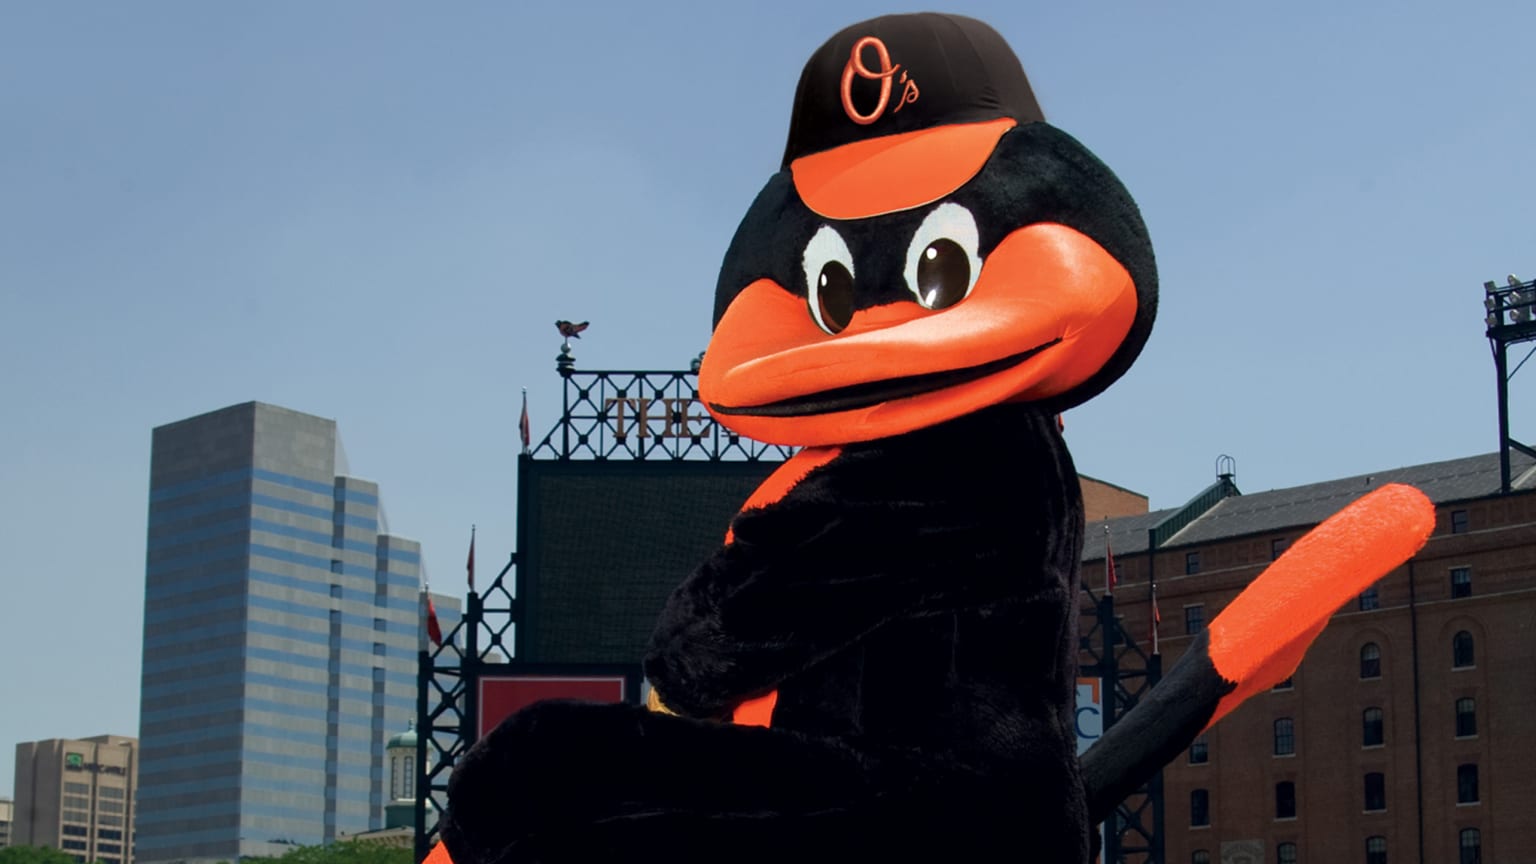 Happy Mother's Day!  Baltimore orioles baseball, Mlb orioles, Baltimore  orioles